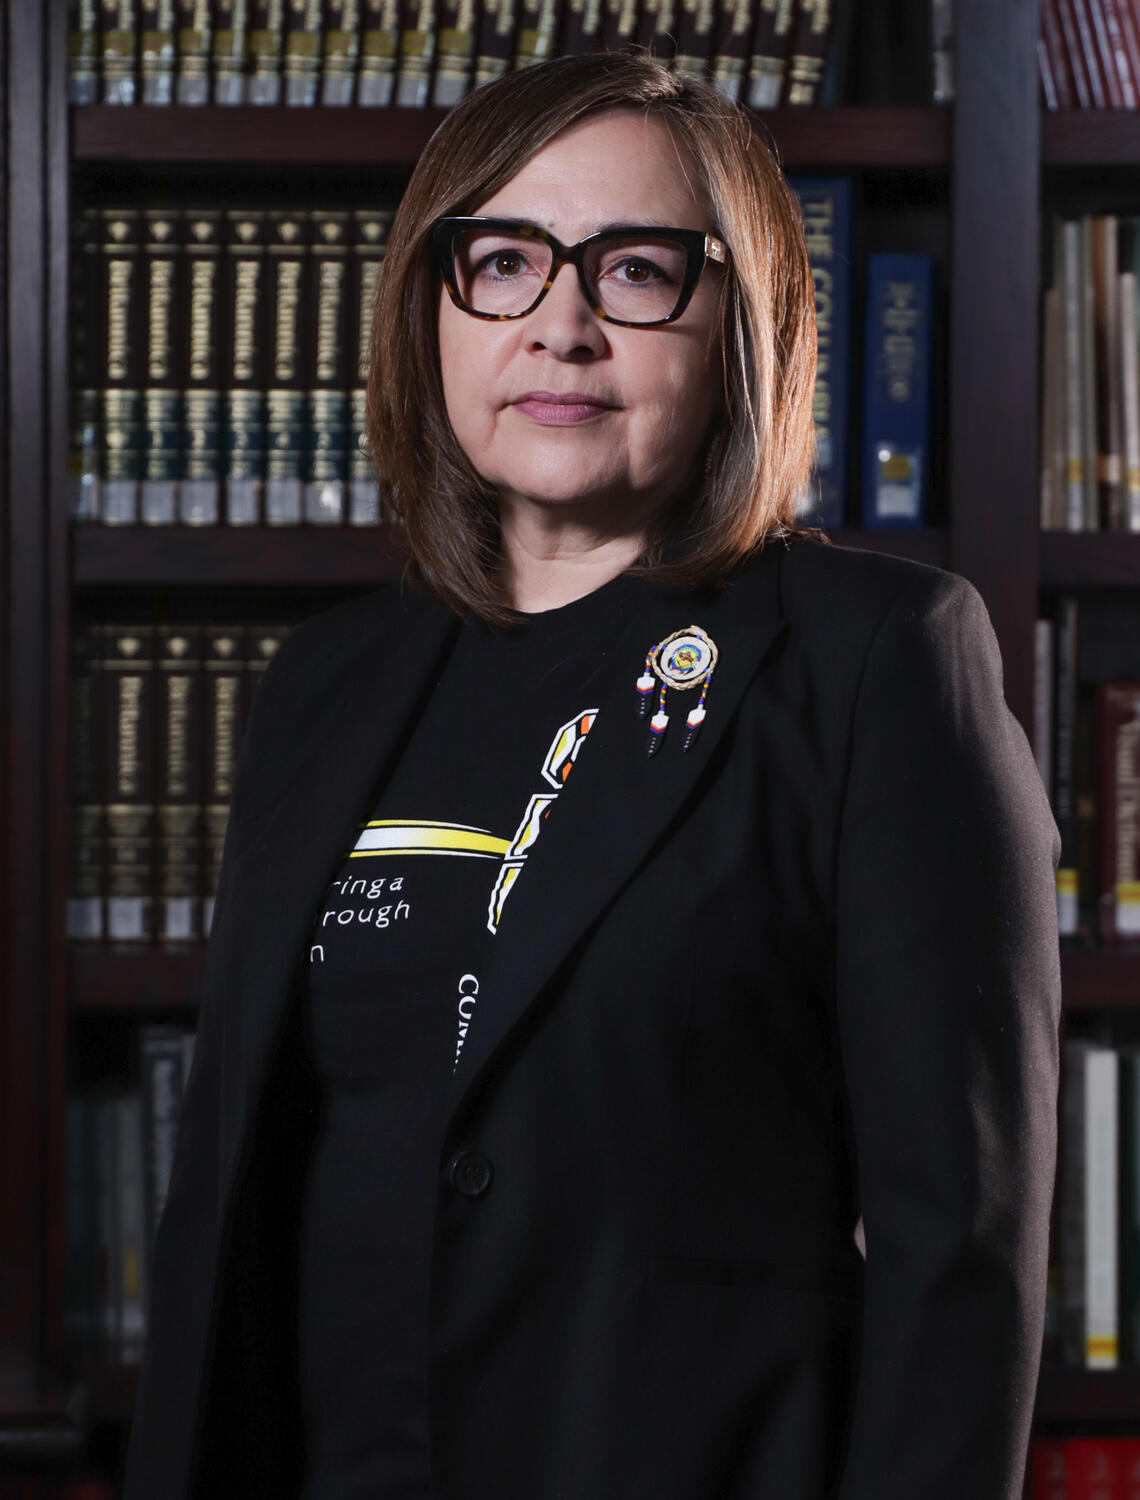 portrait of a woman in business attire, standing in front of a bookcase